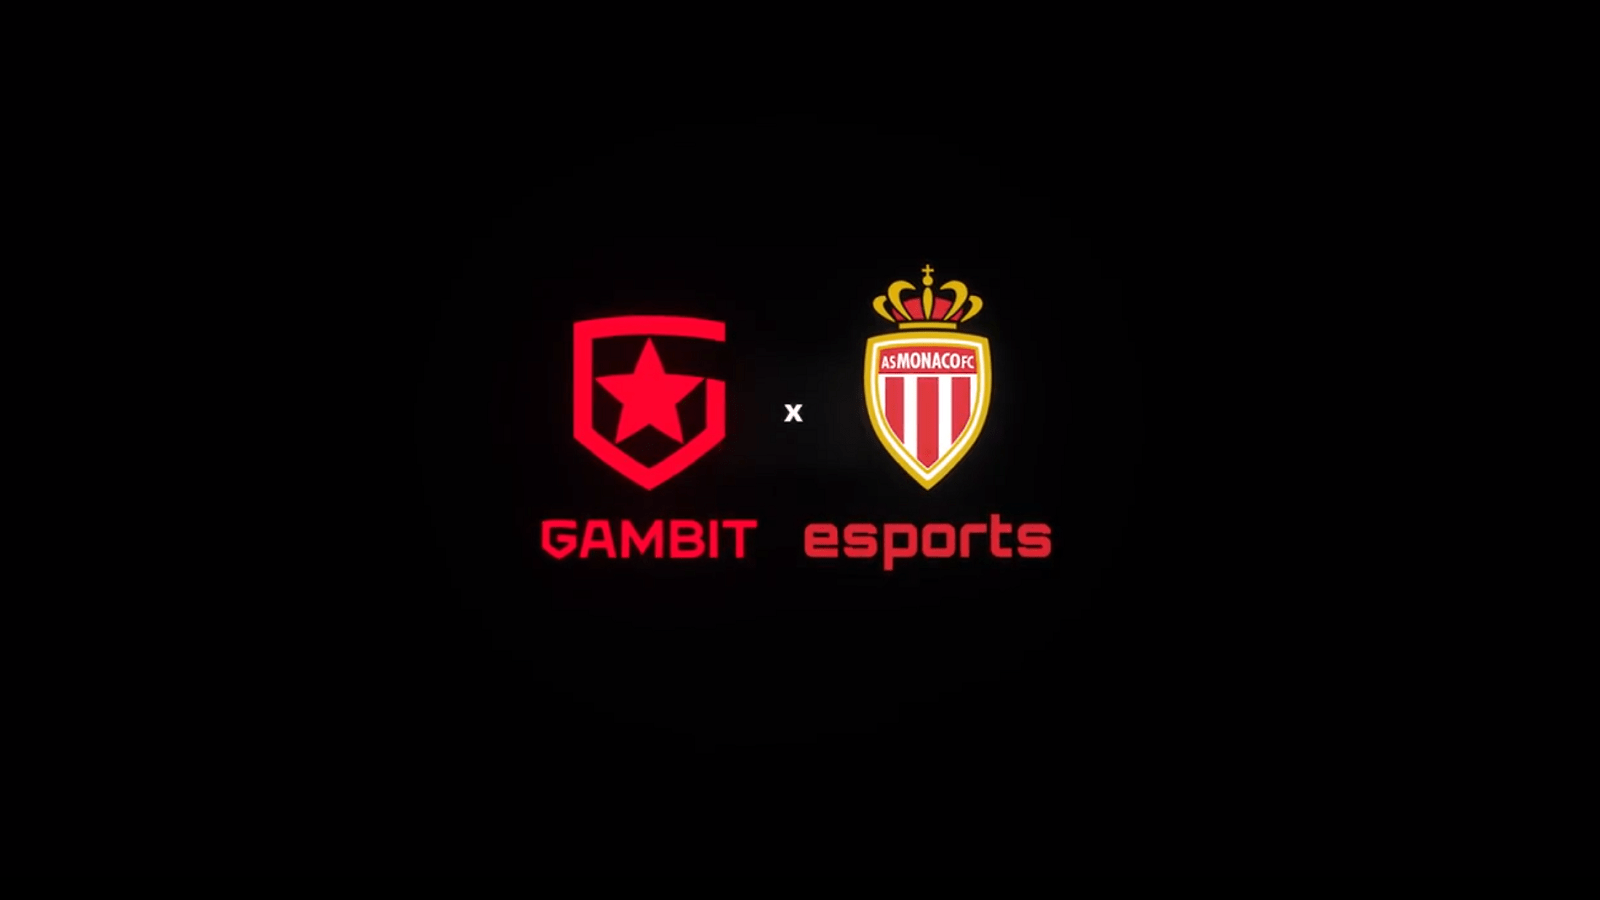 Gambit Esports Partners With AS Monaco For Fortnite And Dota 2